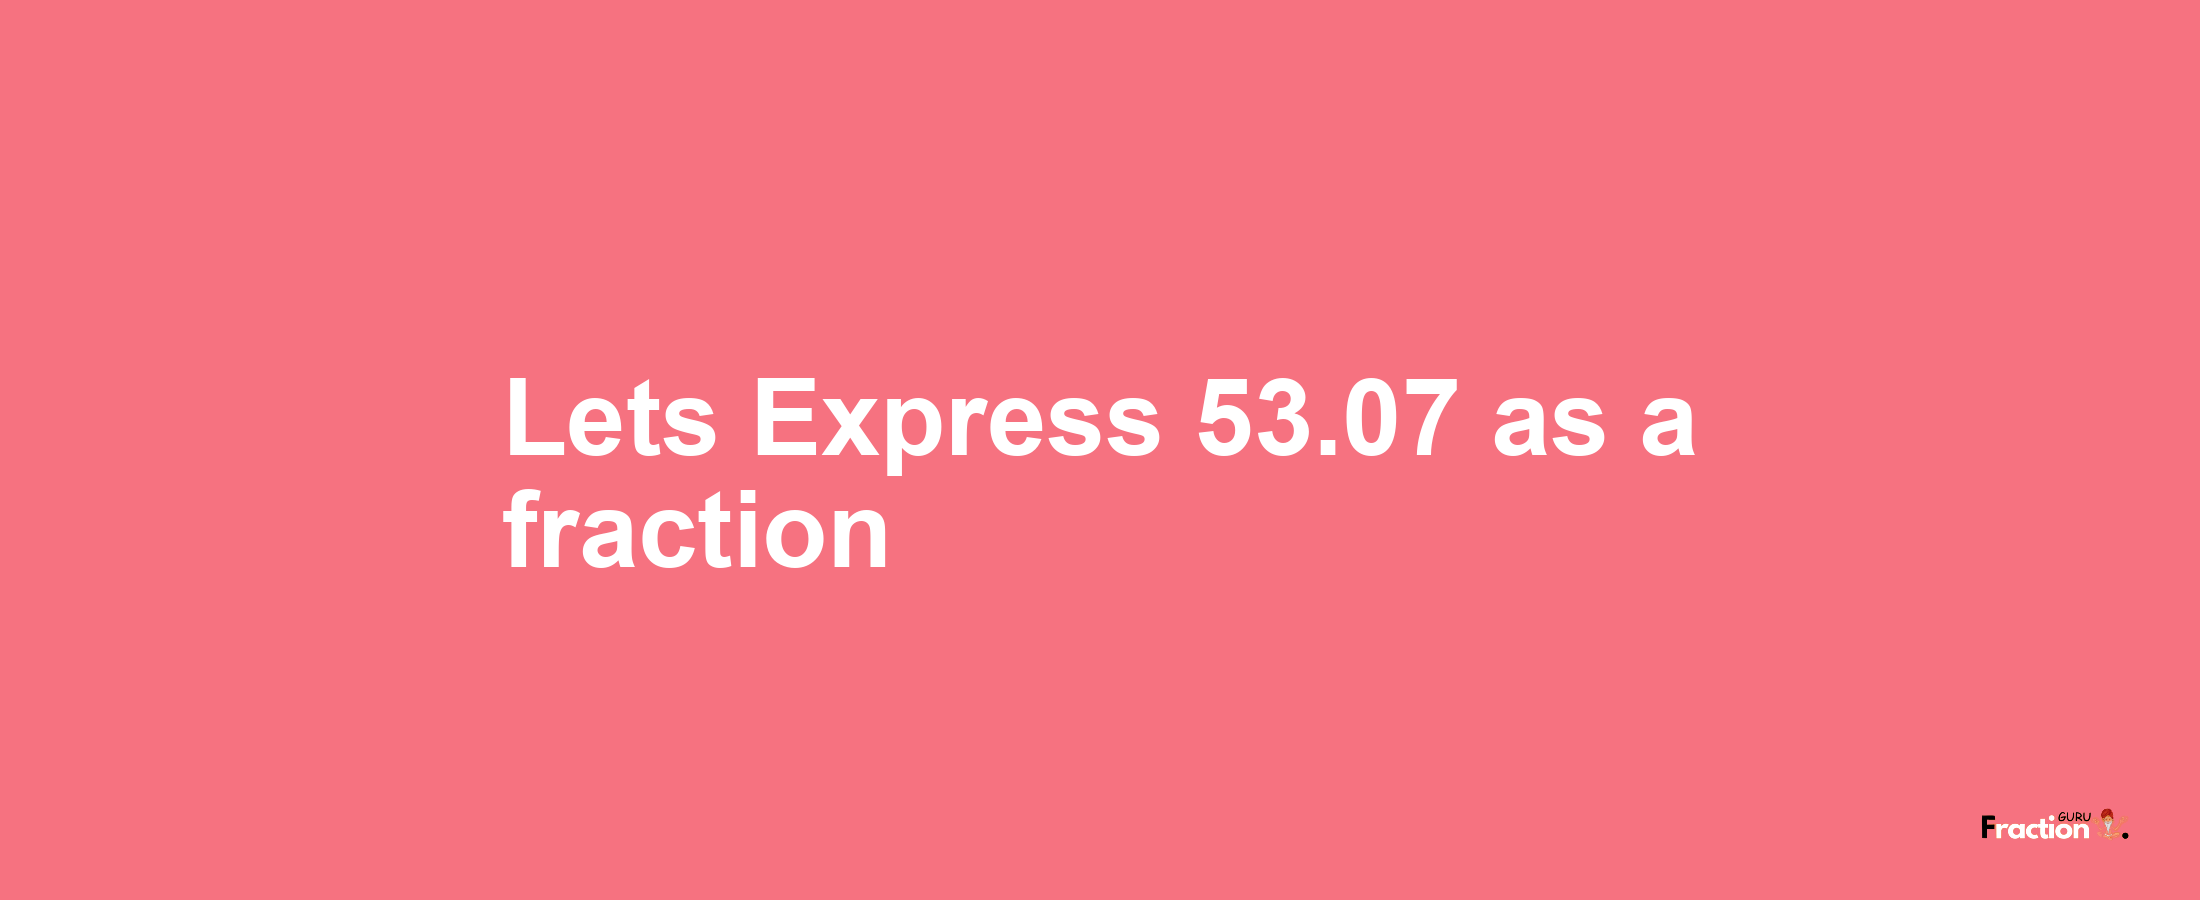 Lets Express 53.07 as afraction